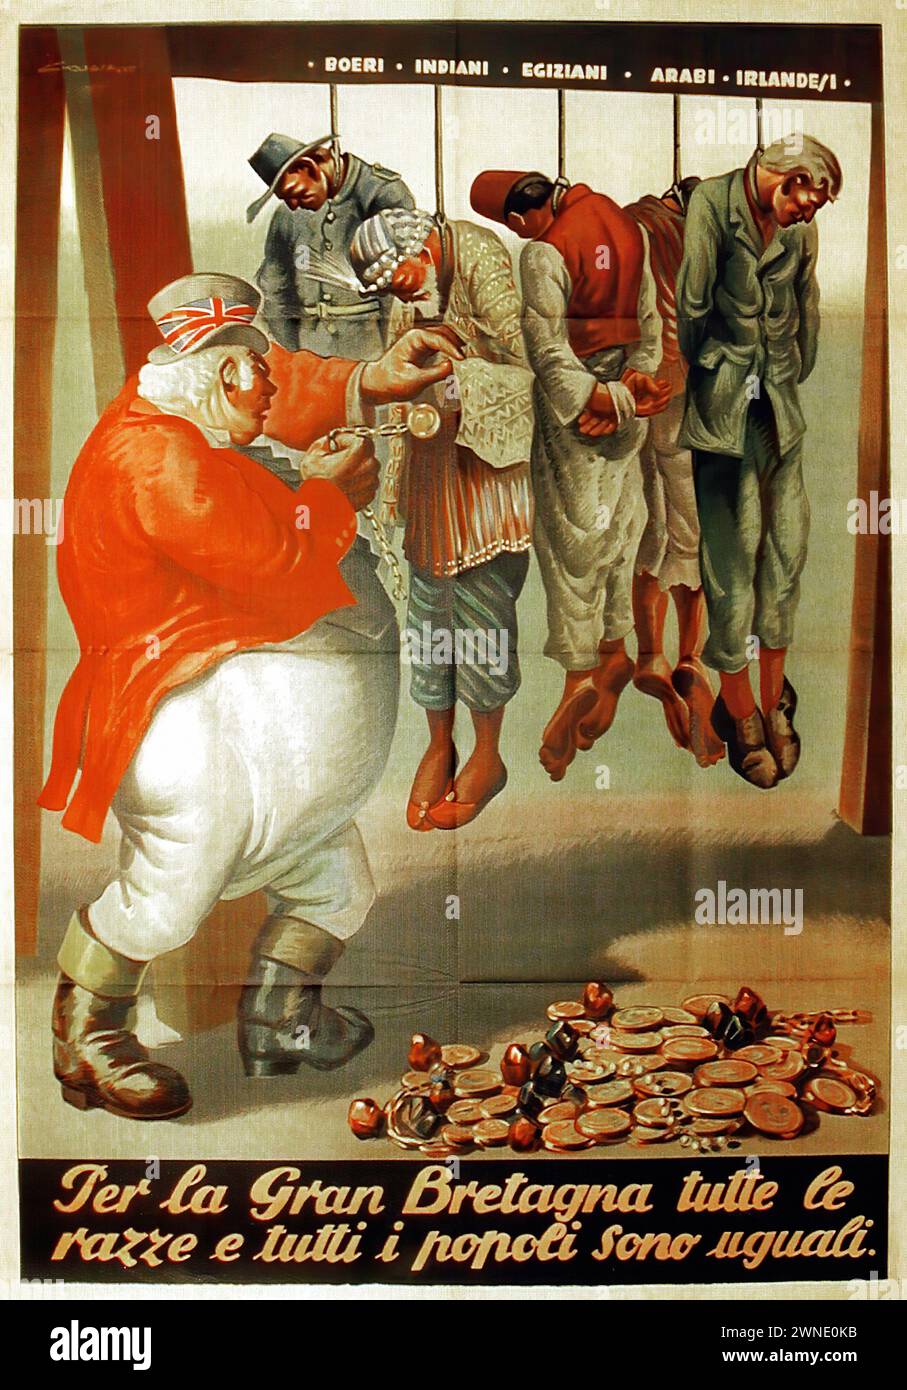 'Per la Gran Bretagna tutte le razze e tutti i popoli sono uguali.' ['For Great Britain all races and all peoples are equal.'] Vintage Italian poster from 1944 criticizing British imperialism, depicting diverse subjugated peoples and a British figure with coins, rendered in a realistic style with a dramatic and political message. Stock Photo